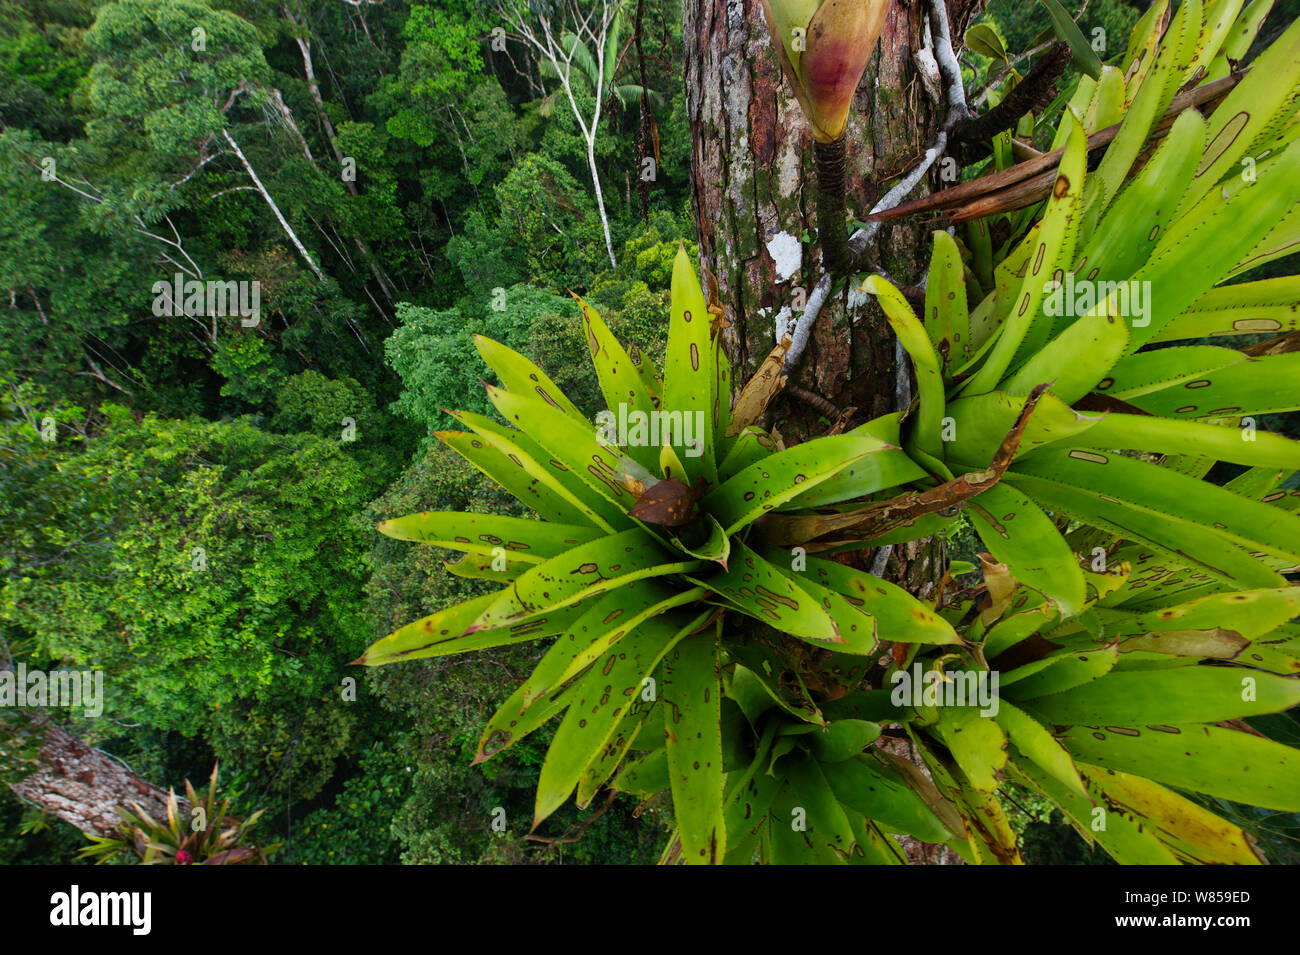 Bromeliad (Bromeliaceae sp) growing on emergent tree in rainforest canopy, near Iquitos, Amazon, Peru Stock Photo